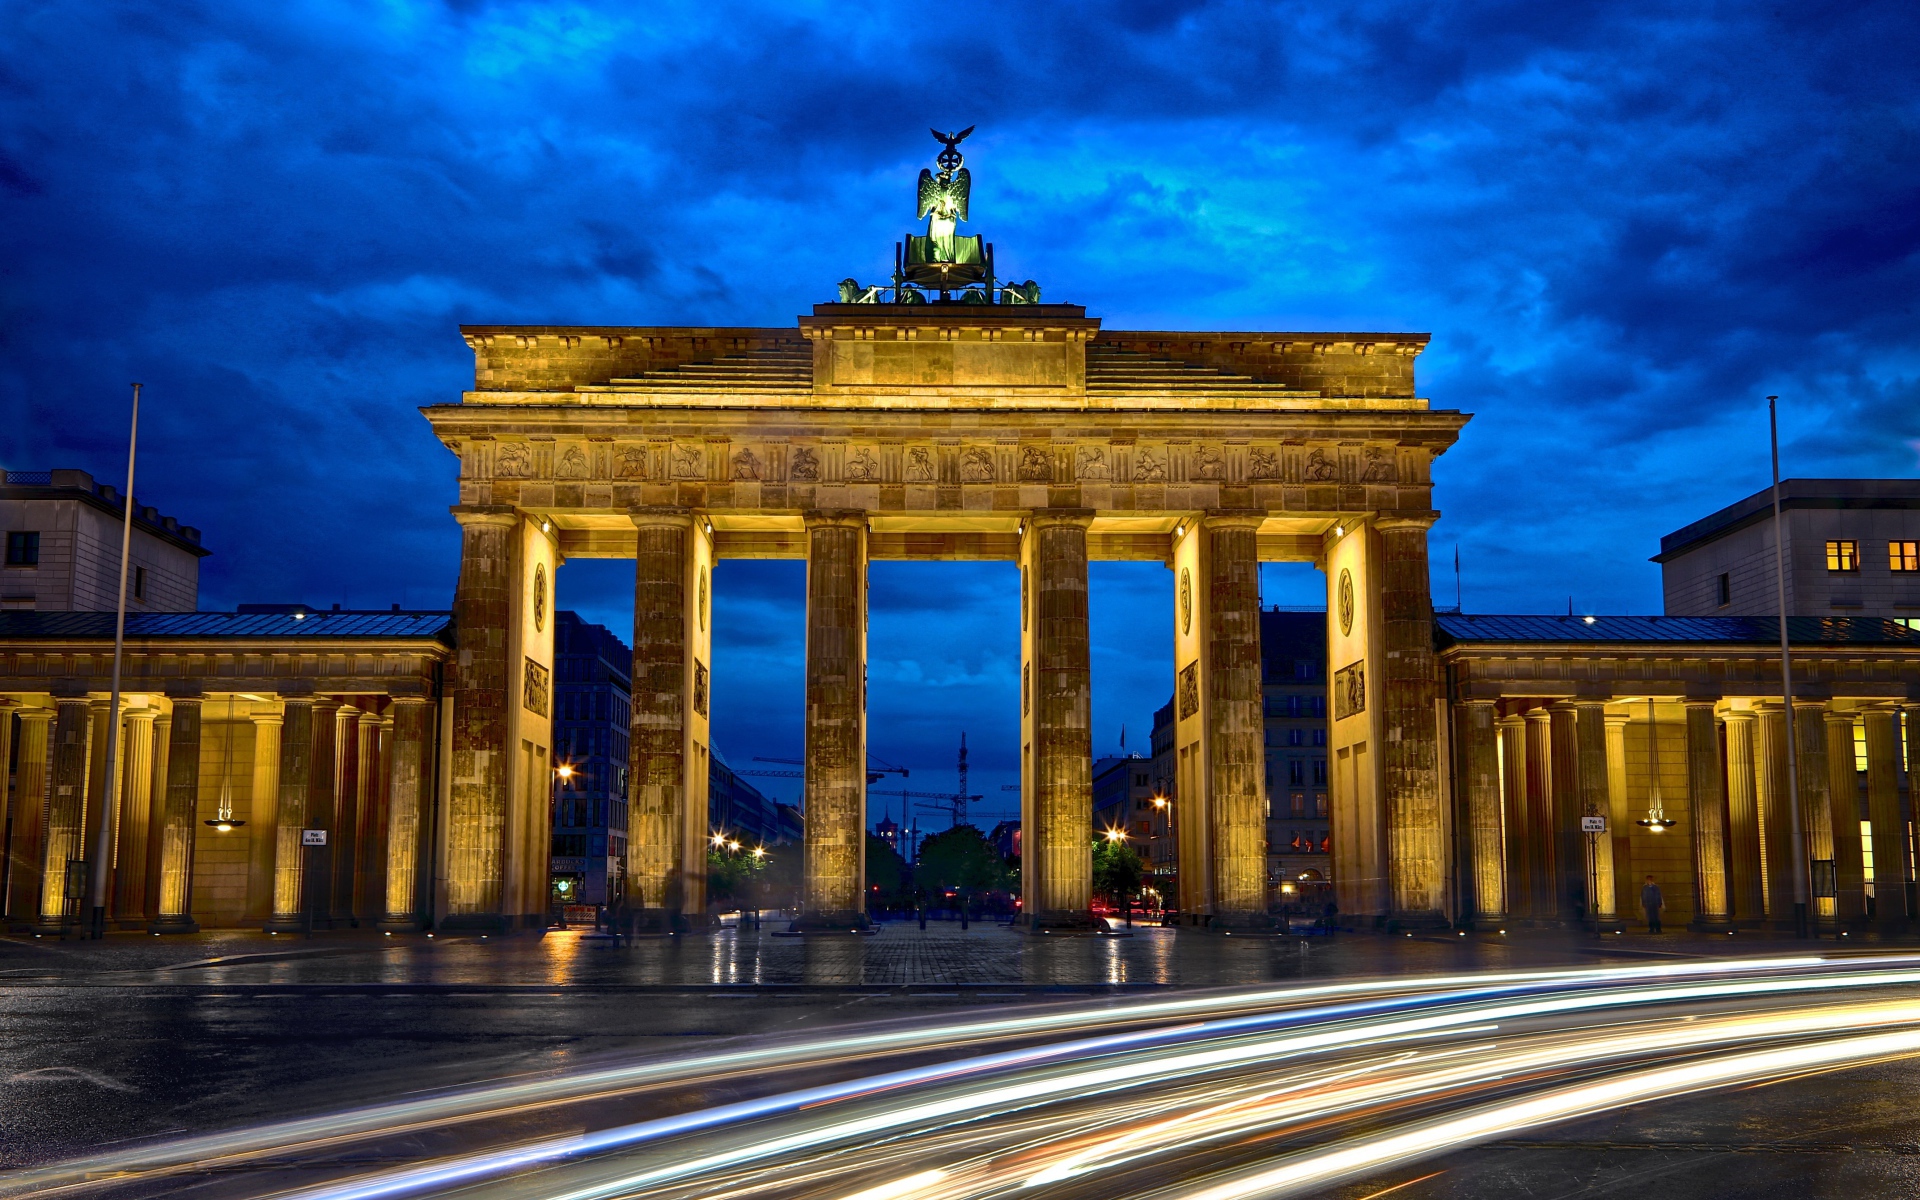 Architectural monument of the Brandenburg Gate, Berlin. Germany